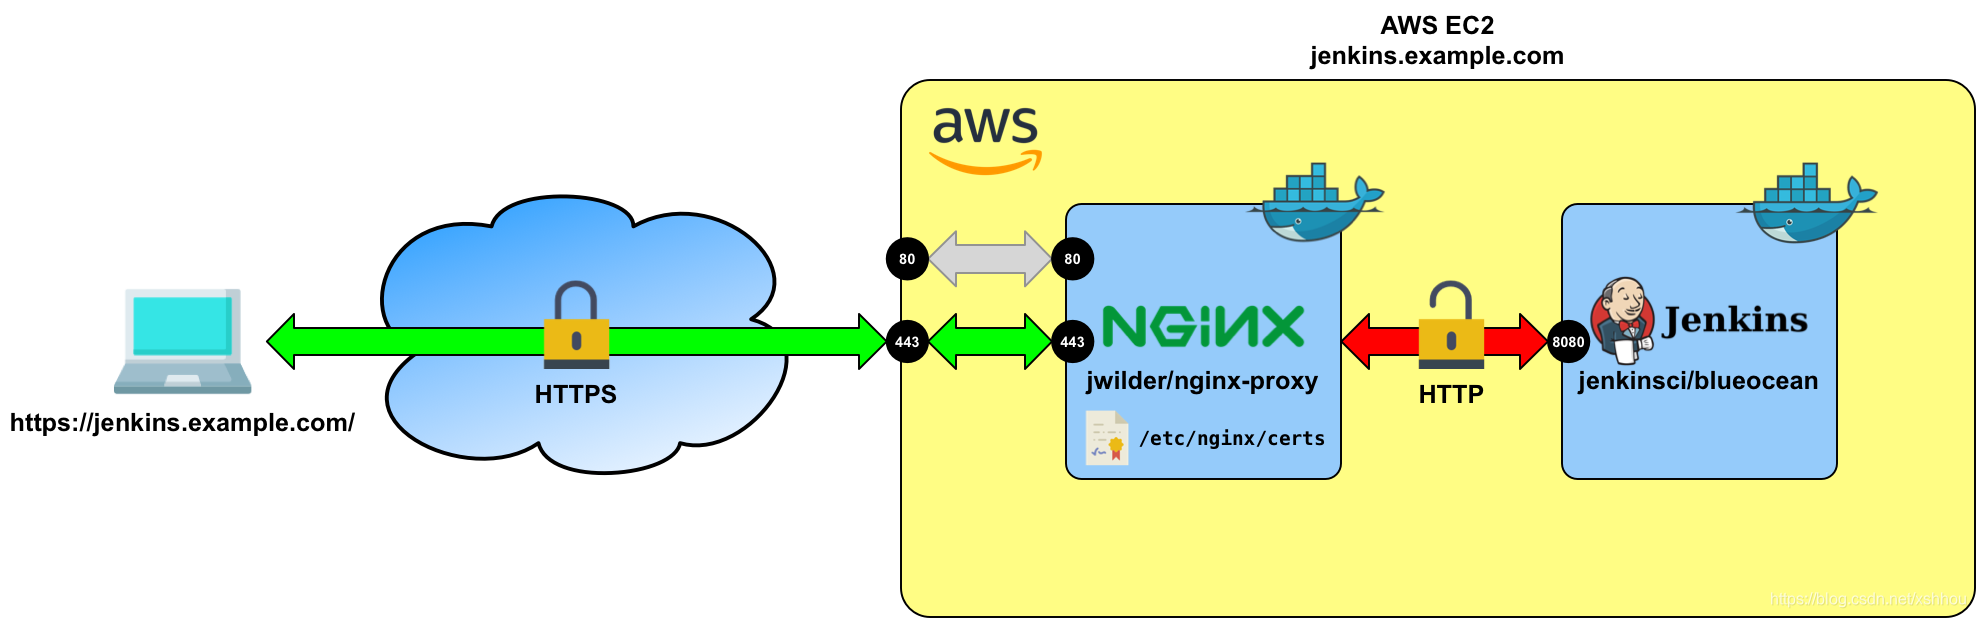 Running an NGINX Docker container in front of a Jenkins Docker container in order to allow HTTPS access to Jenkins.